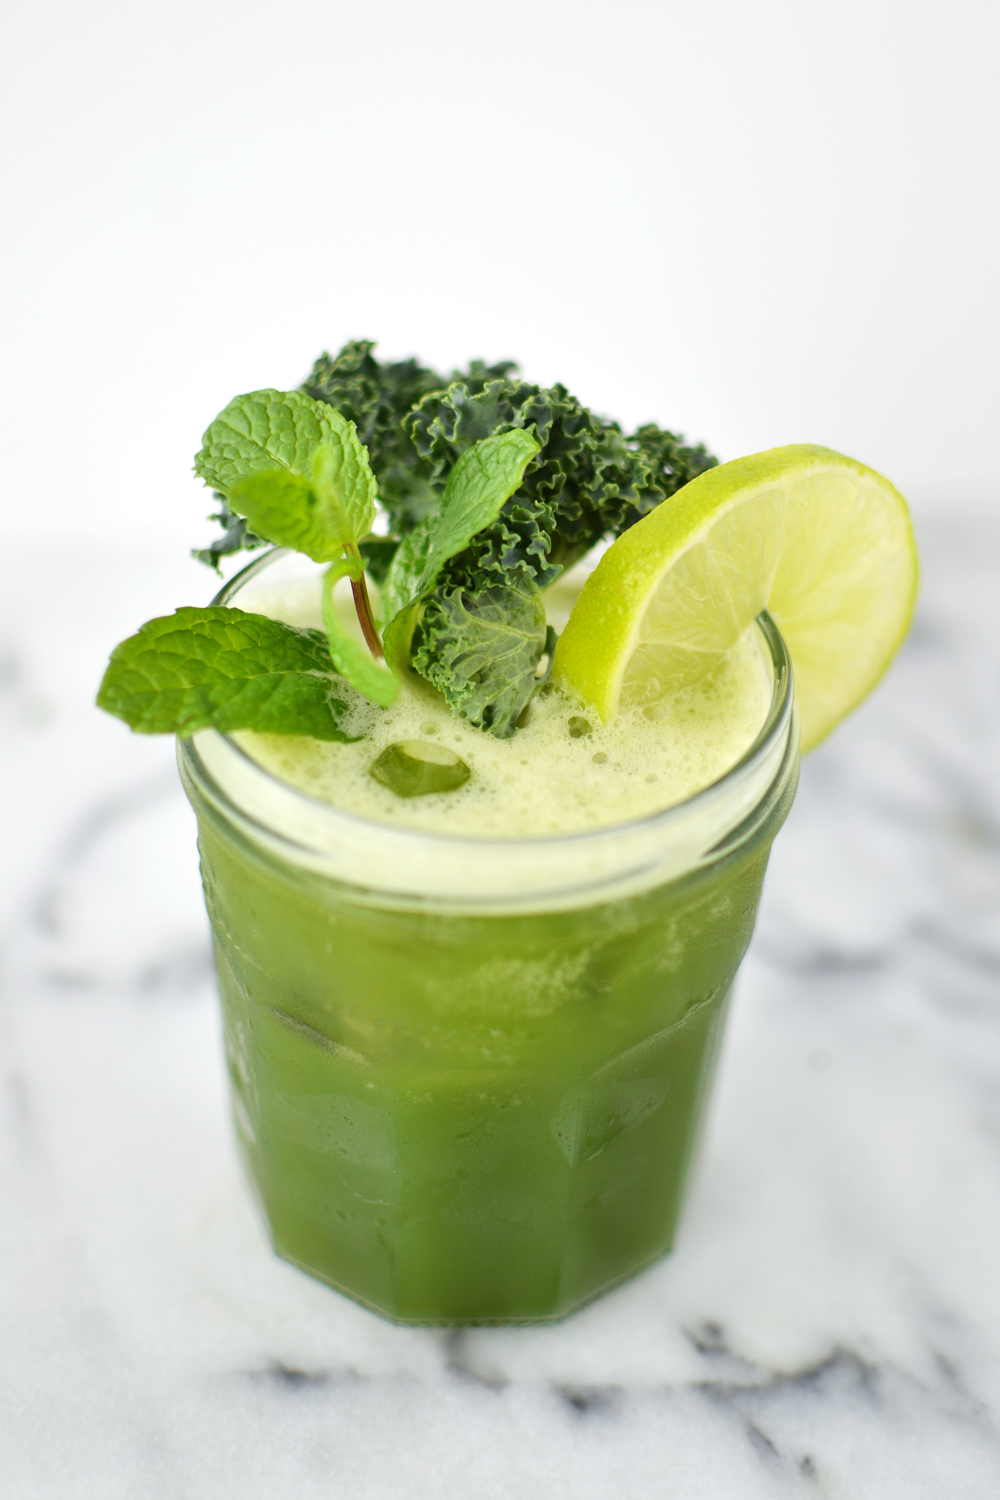 kitskitchen st.patrick's day green drink the juicer co. pacific